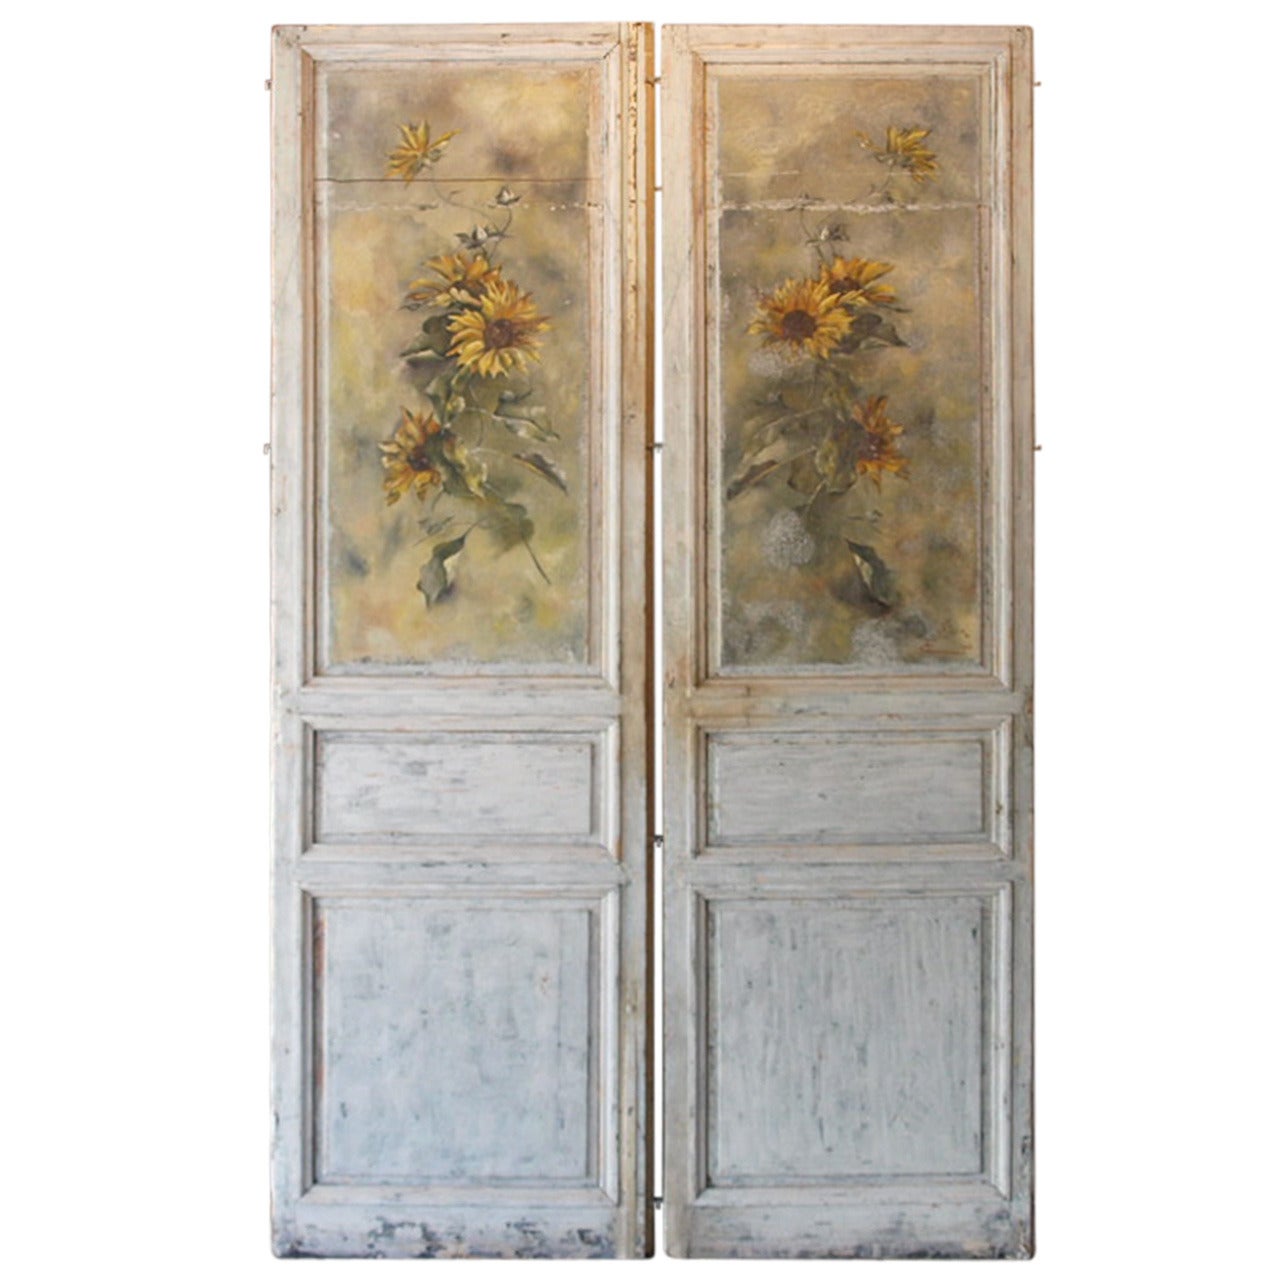 Pair of French Painted Sunflower Door Panels, circa 1903